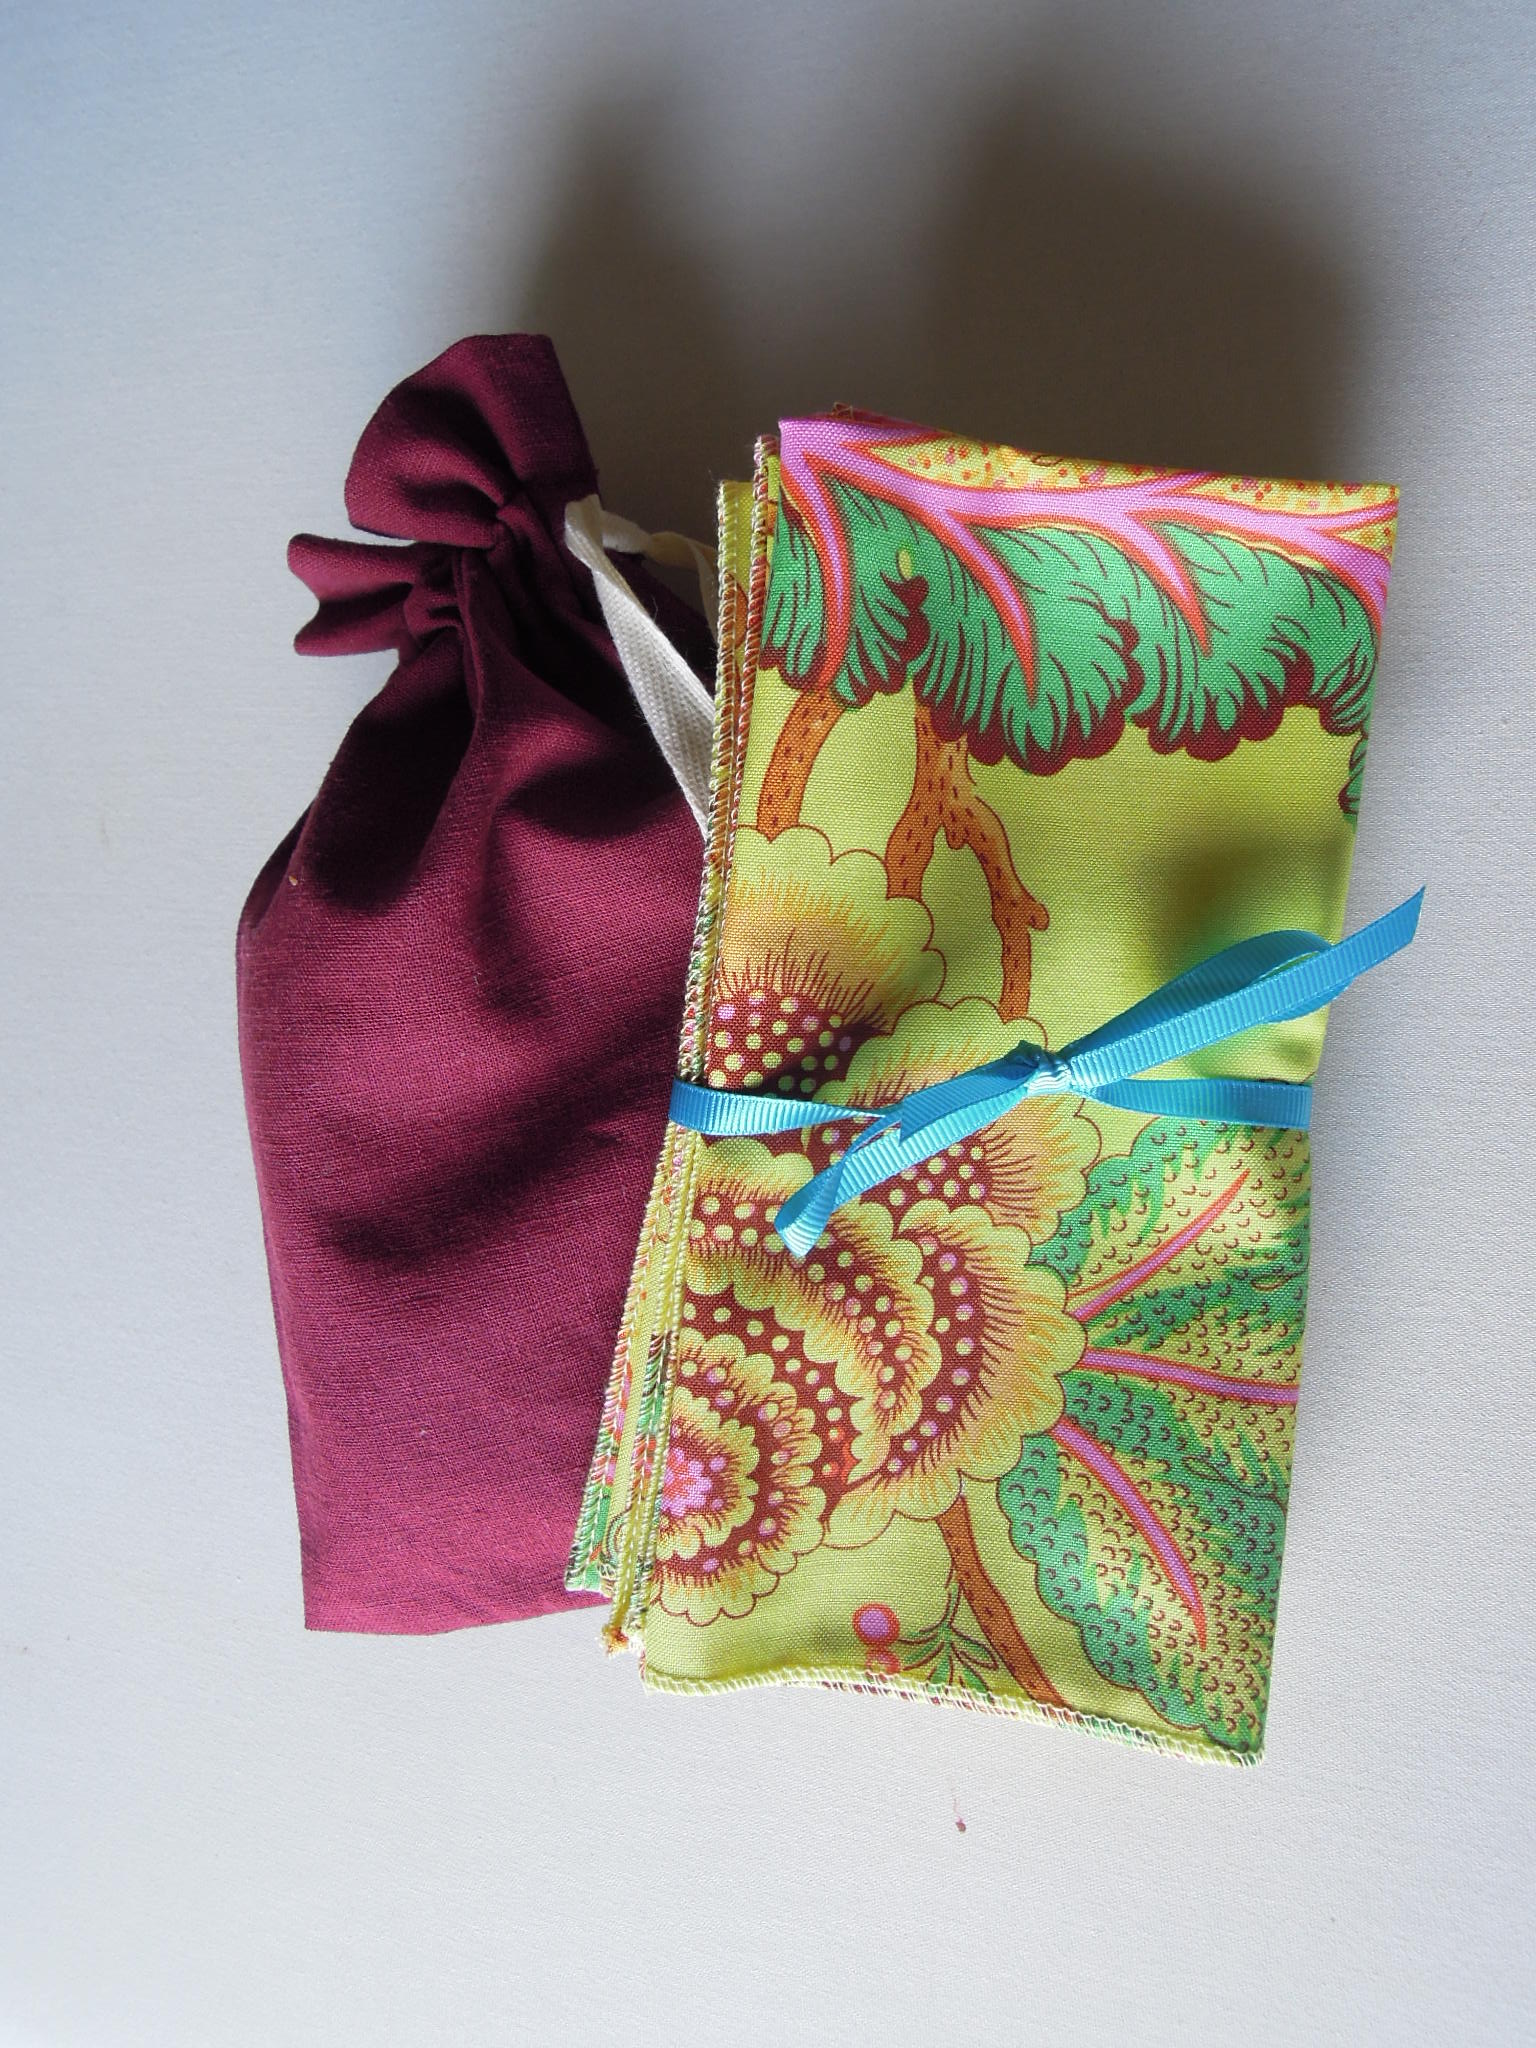 December Giveaway – Colourful, Organic Cocktail Napkins!